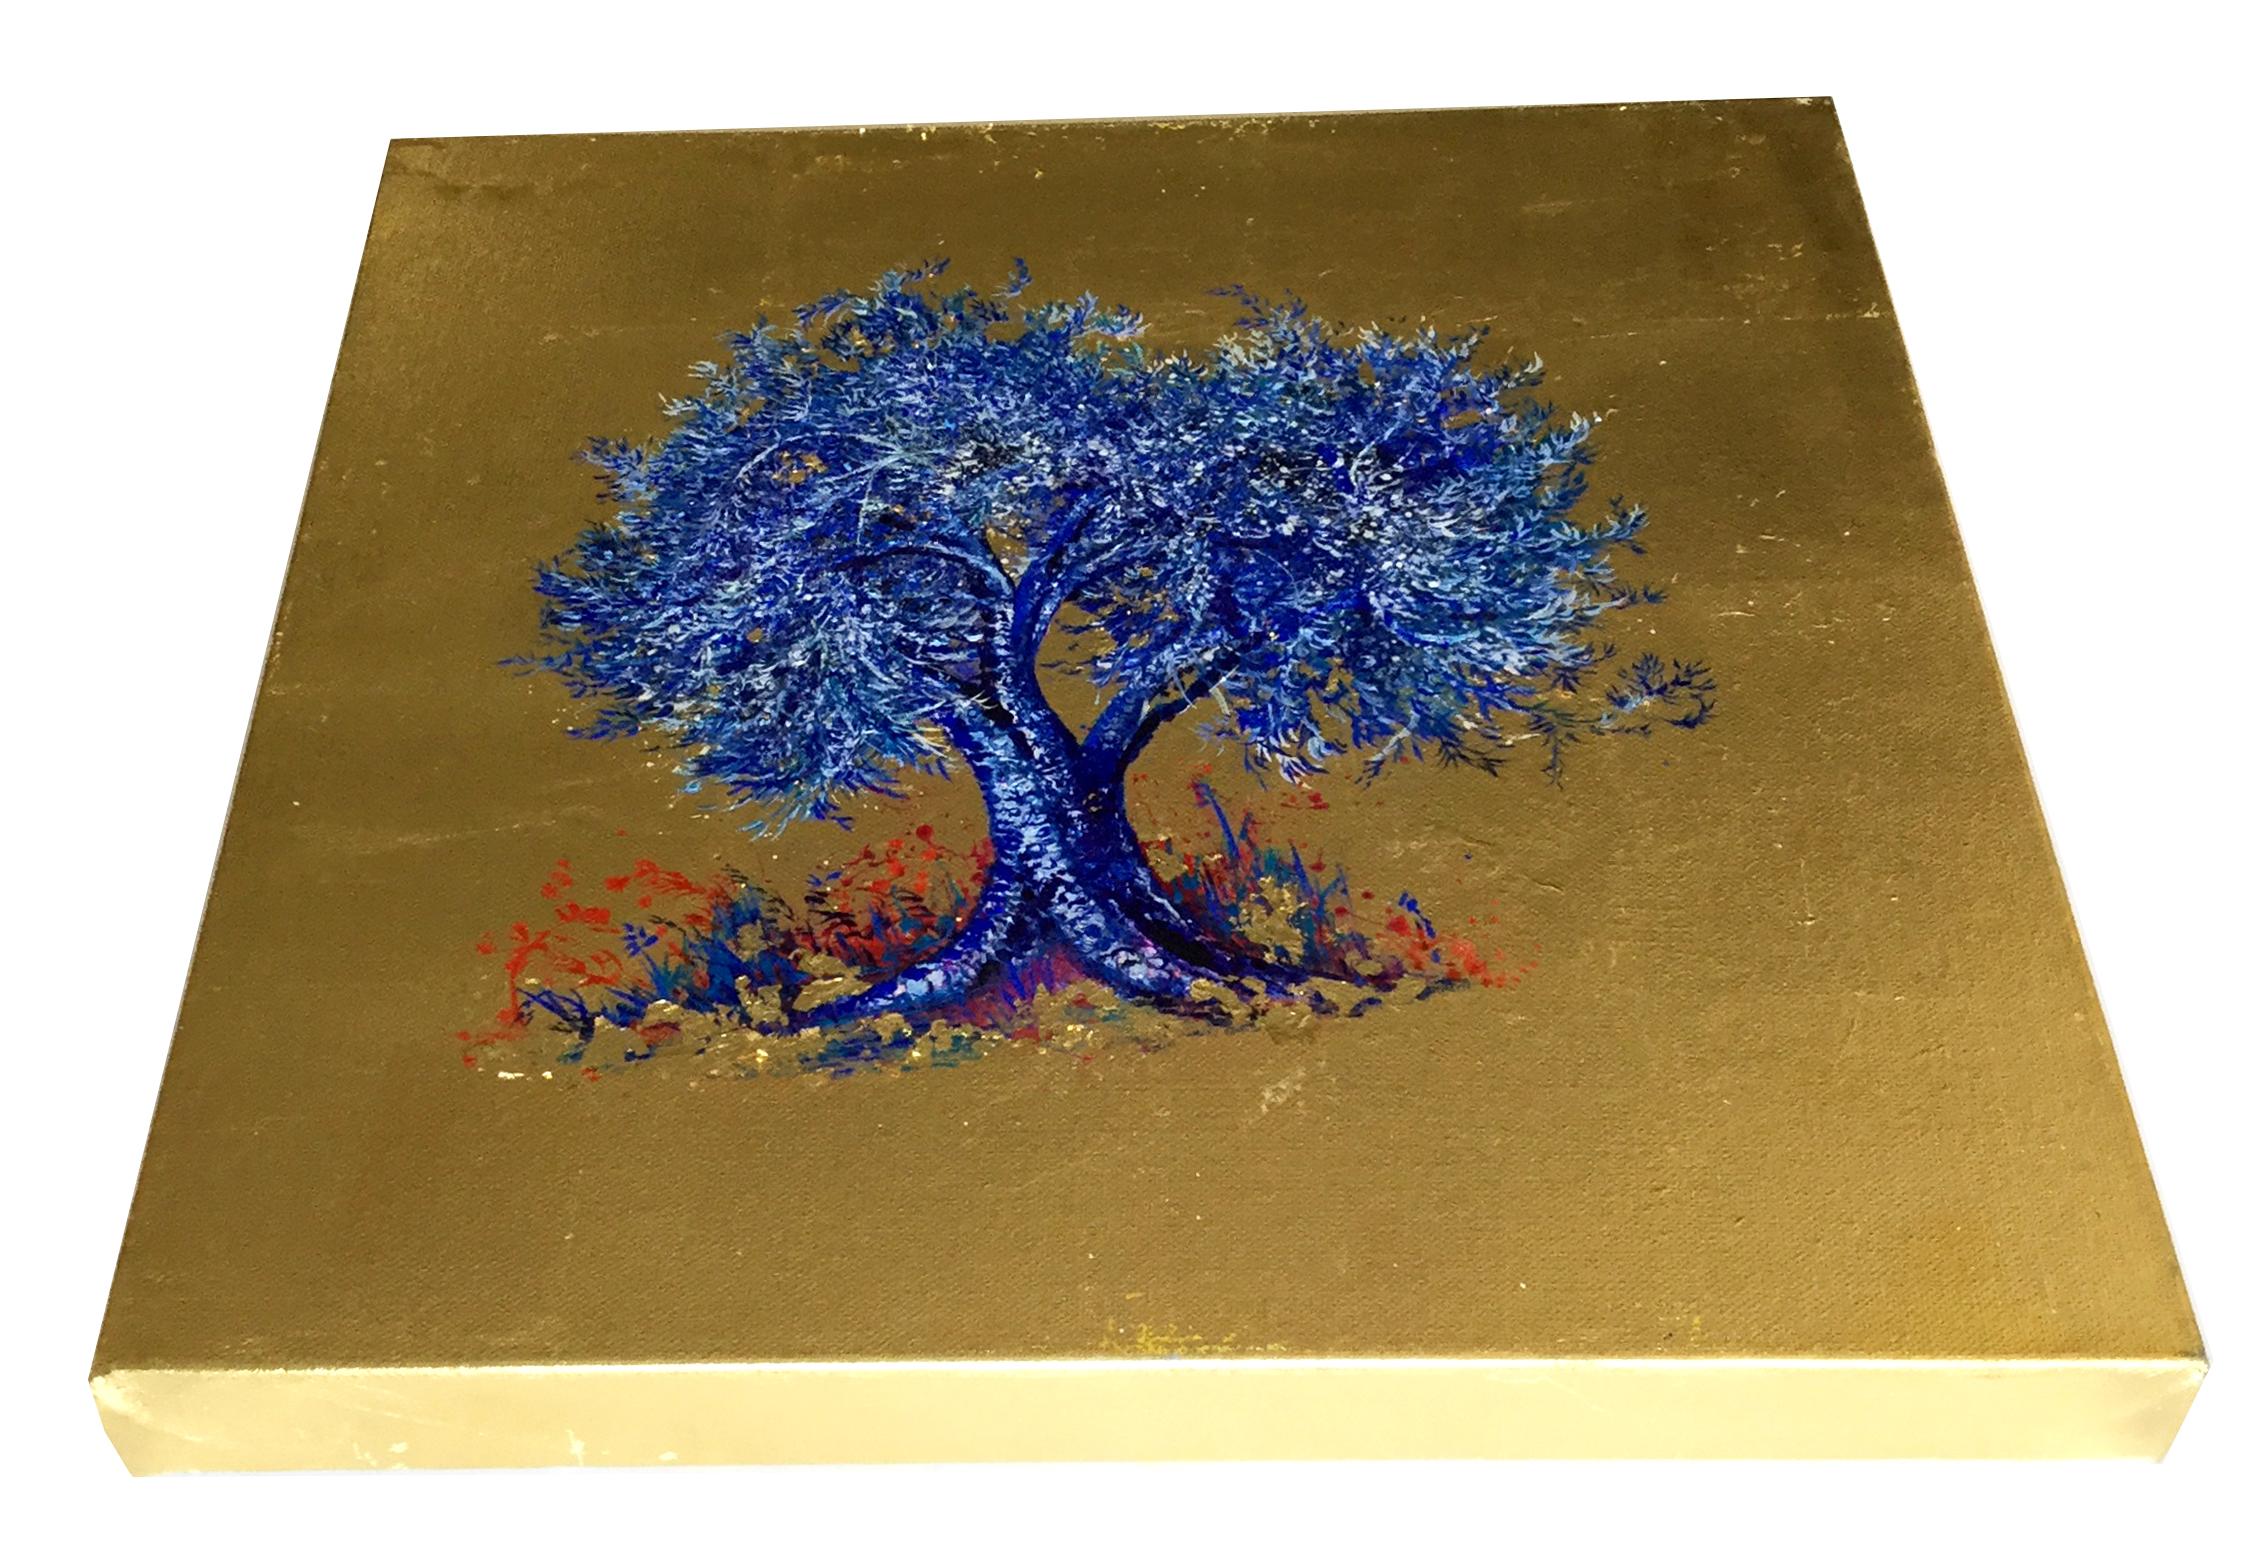 Indigo, Blossom Blue Tree, Contemporary Oil on Canvas Gold Leaf Painting  4